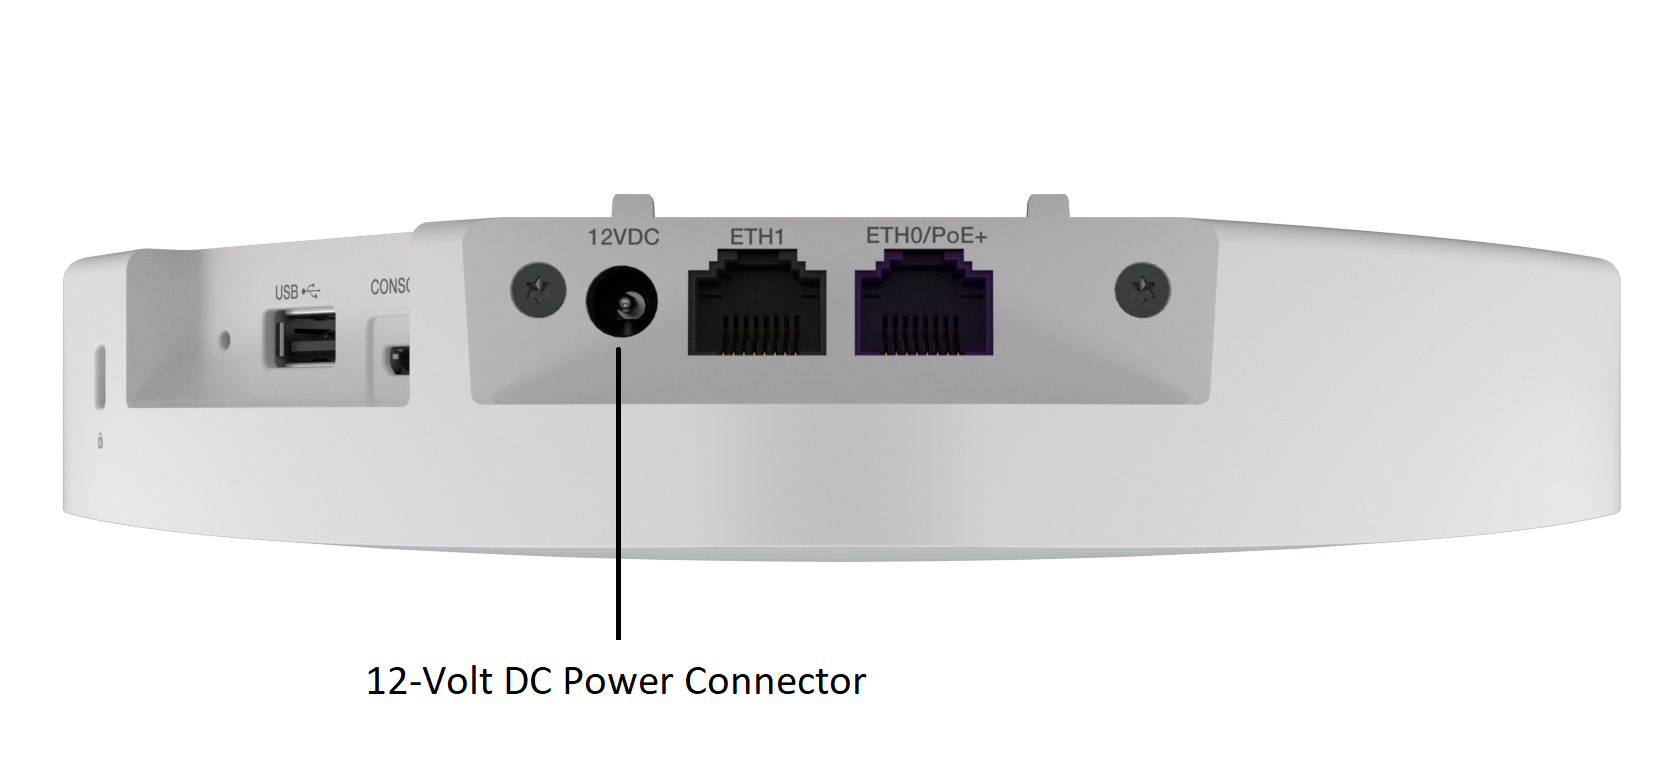 The AP3000X access point power port is located to the left of the ETH1 port.